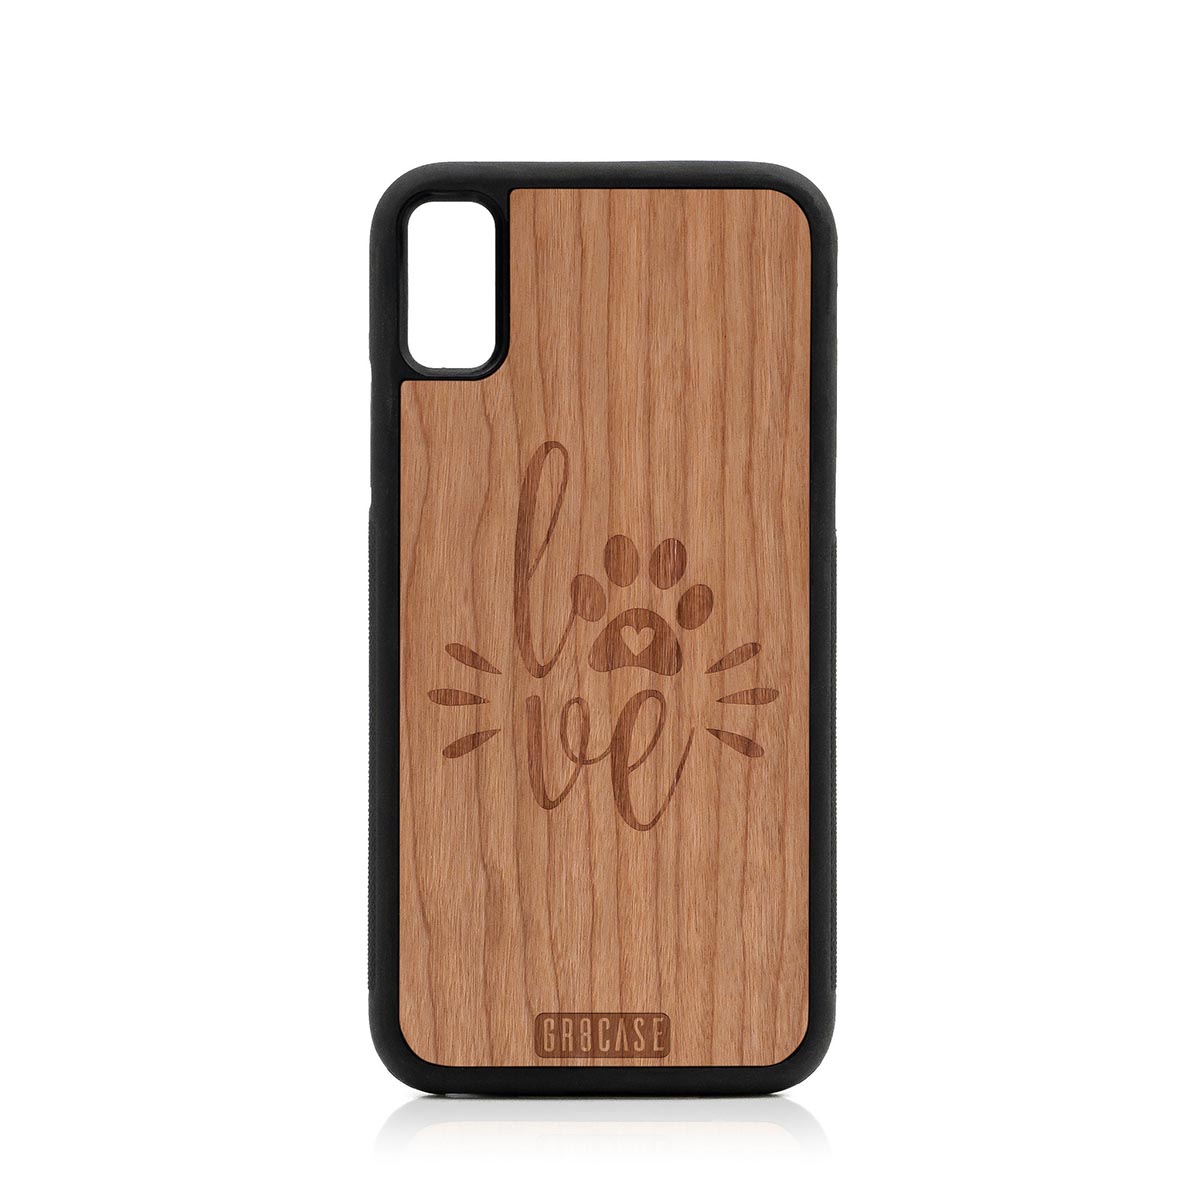 Paw Love Design Wood Case For iPhone XS Max by GR8CASE